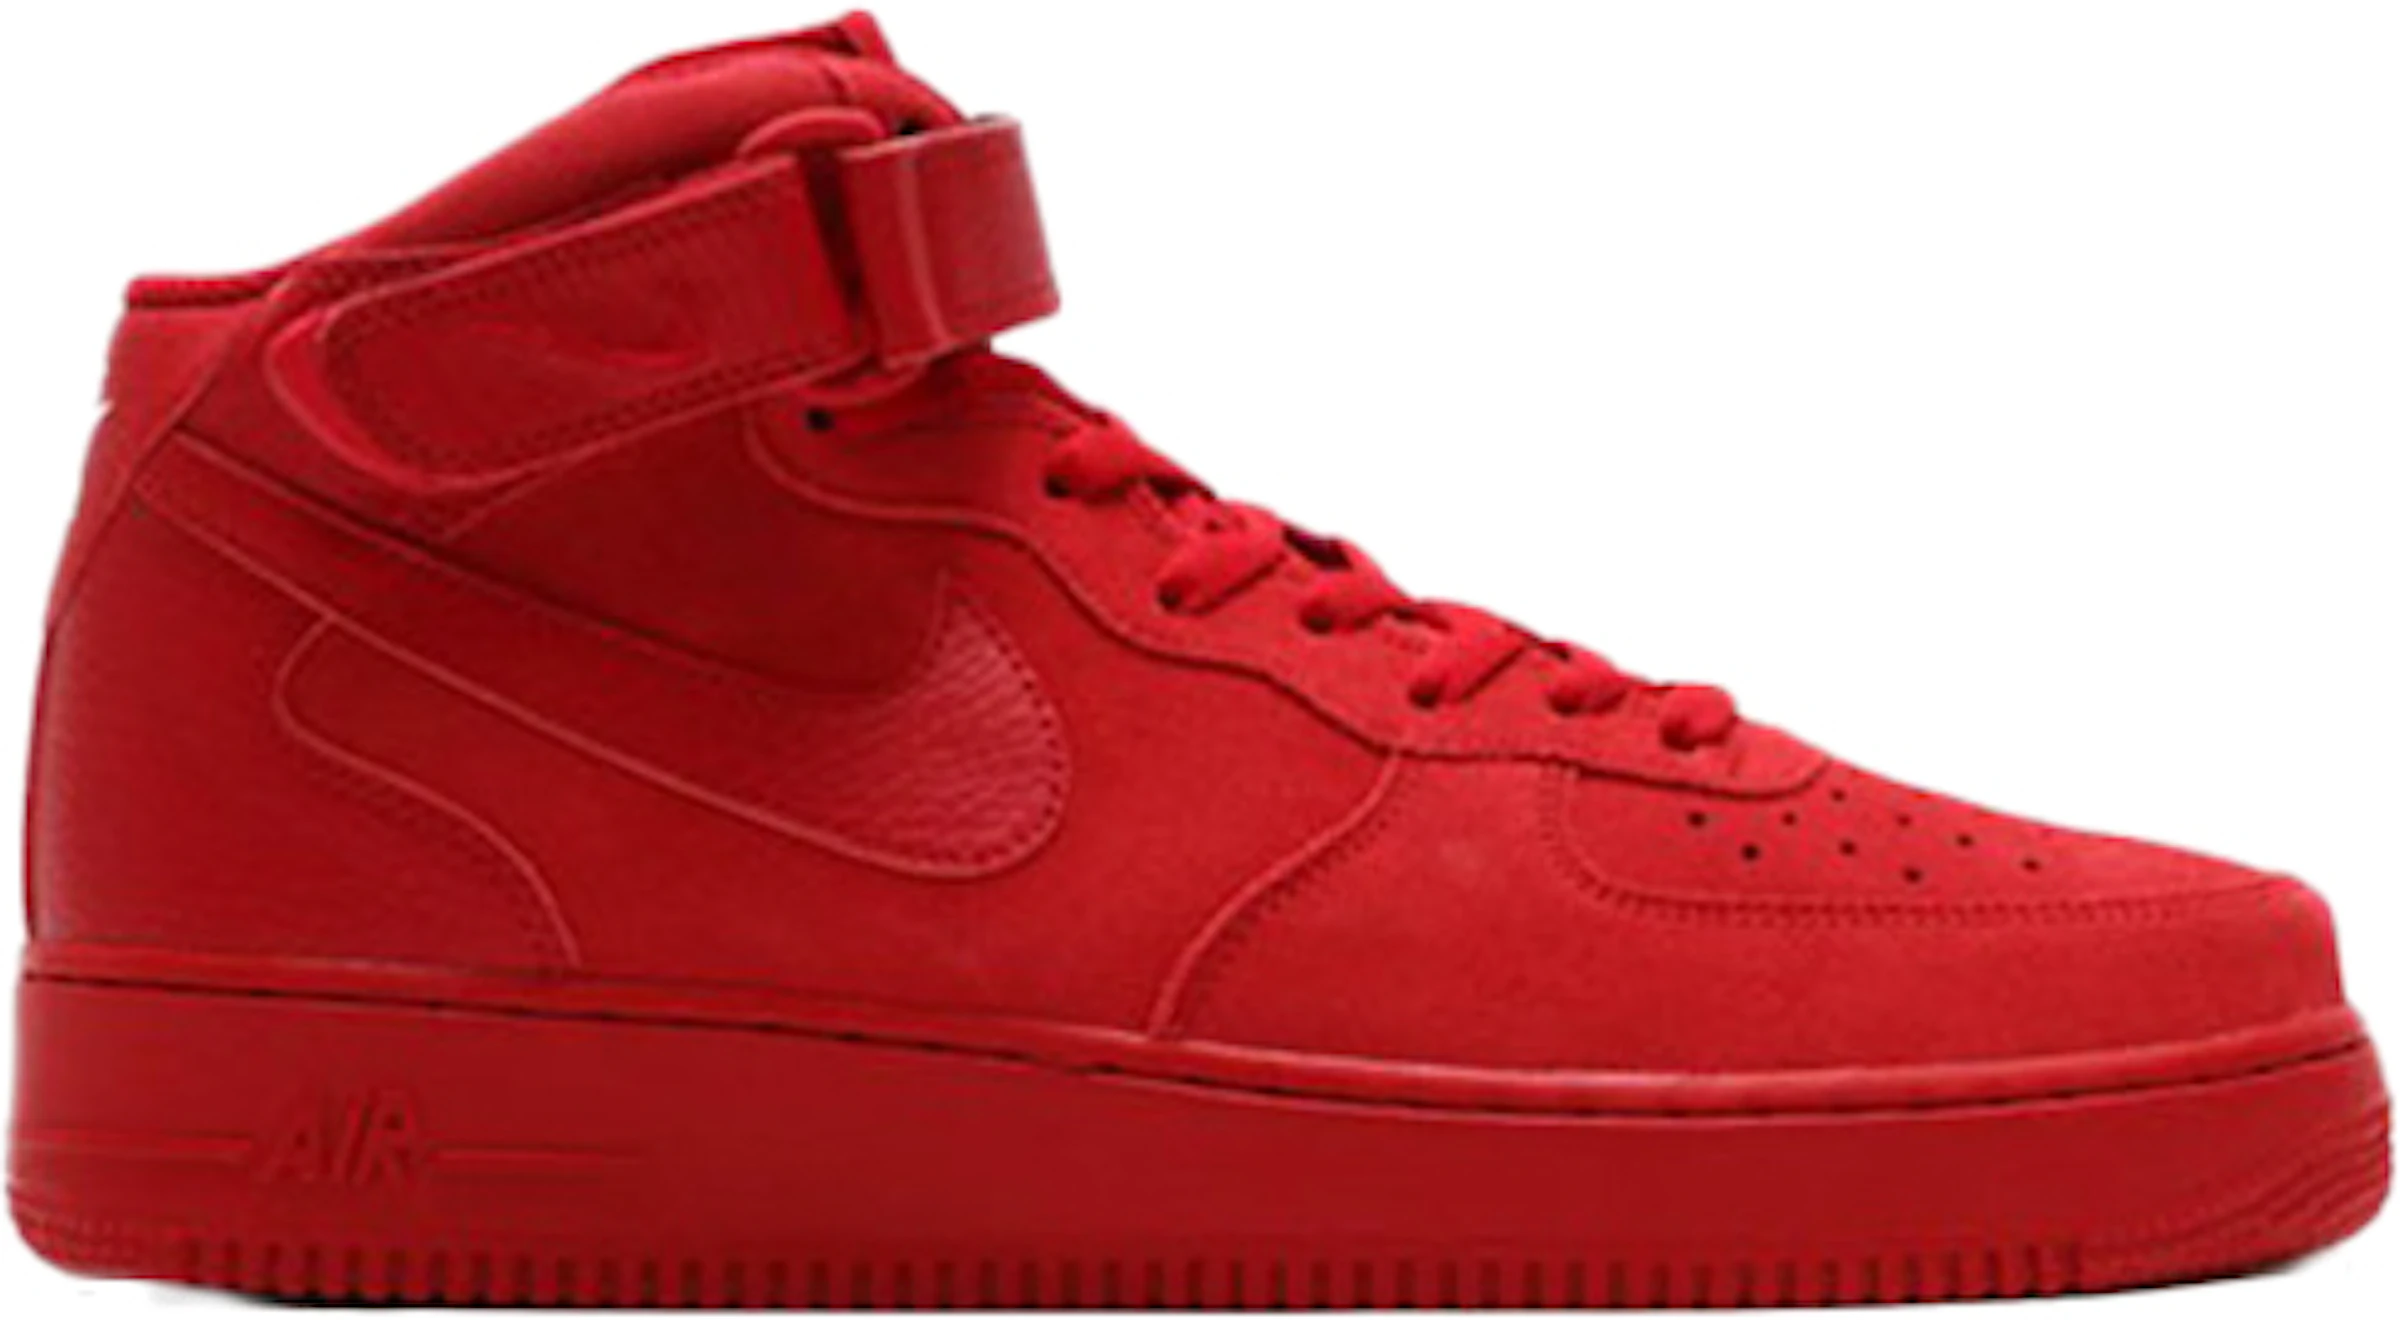 Nike Air Force 1 Mid Gym Red - 819677-600 -